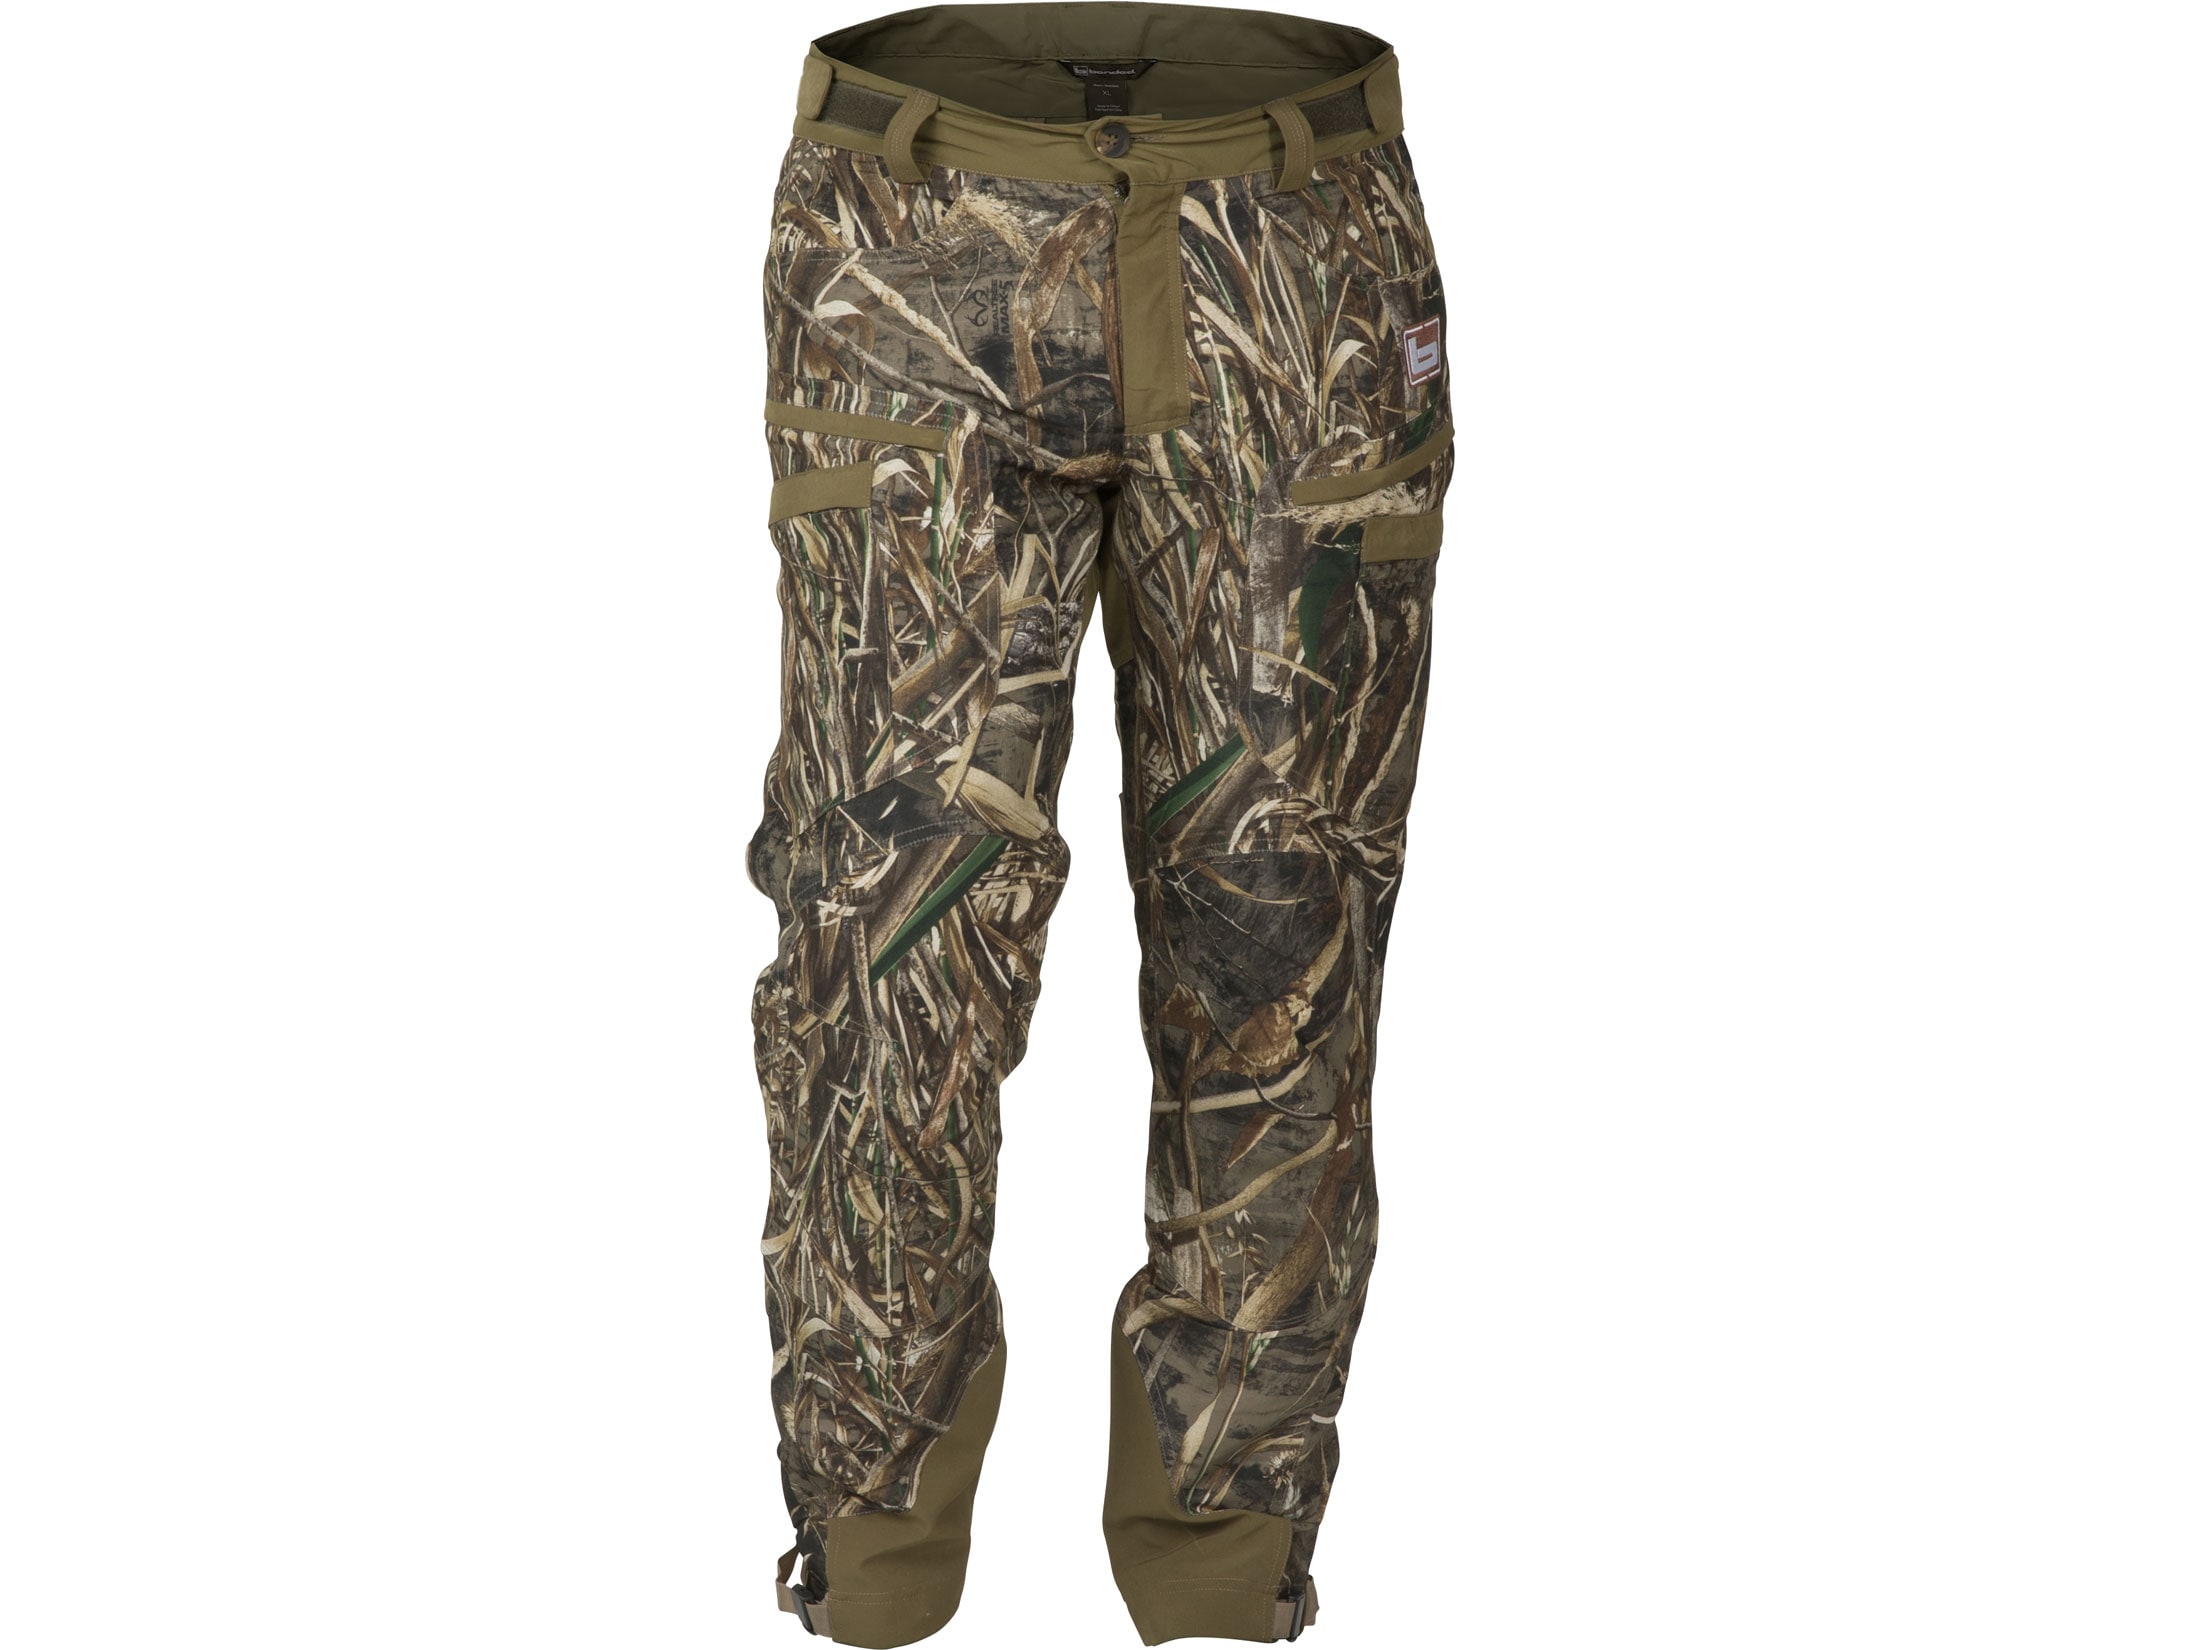 Banded Men's Lightweight Hunting Pants Polyester Realtree Max-5 Camo